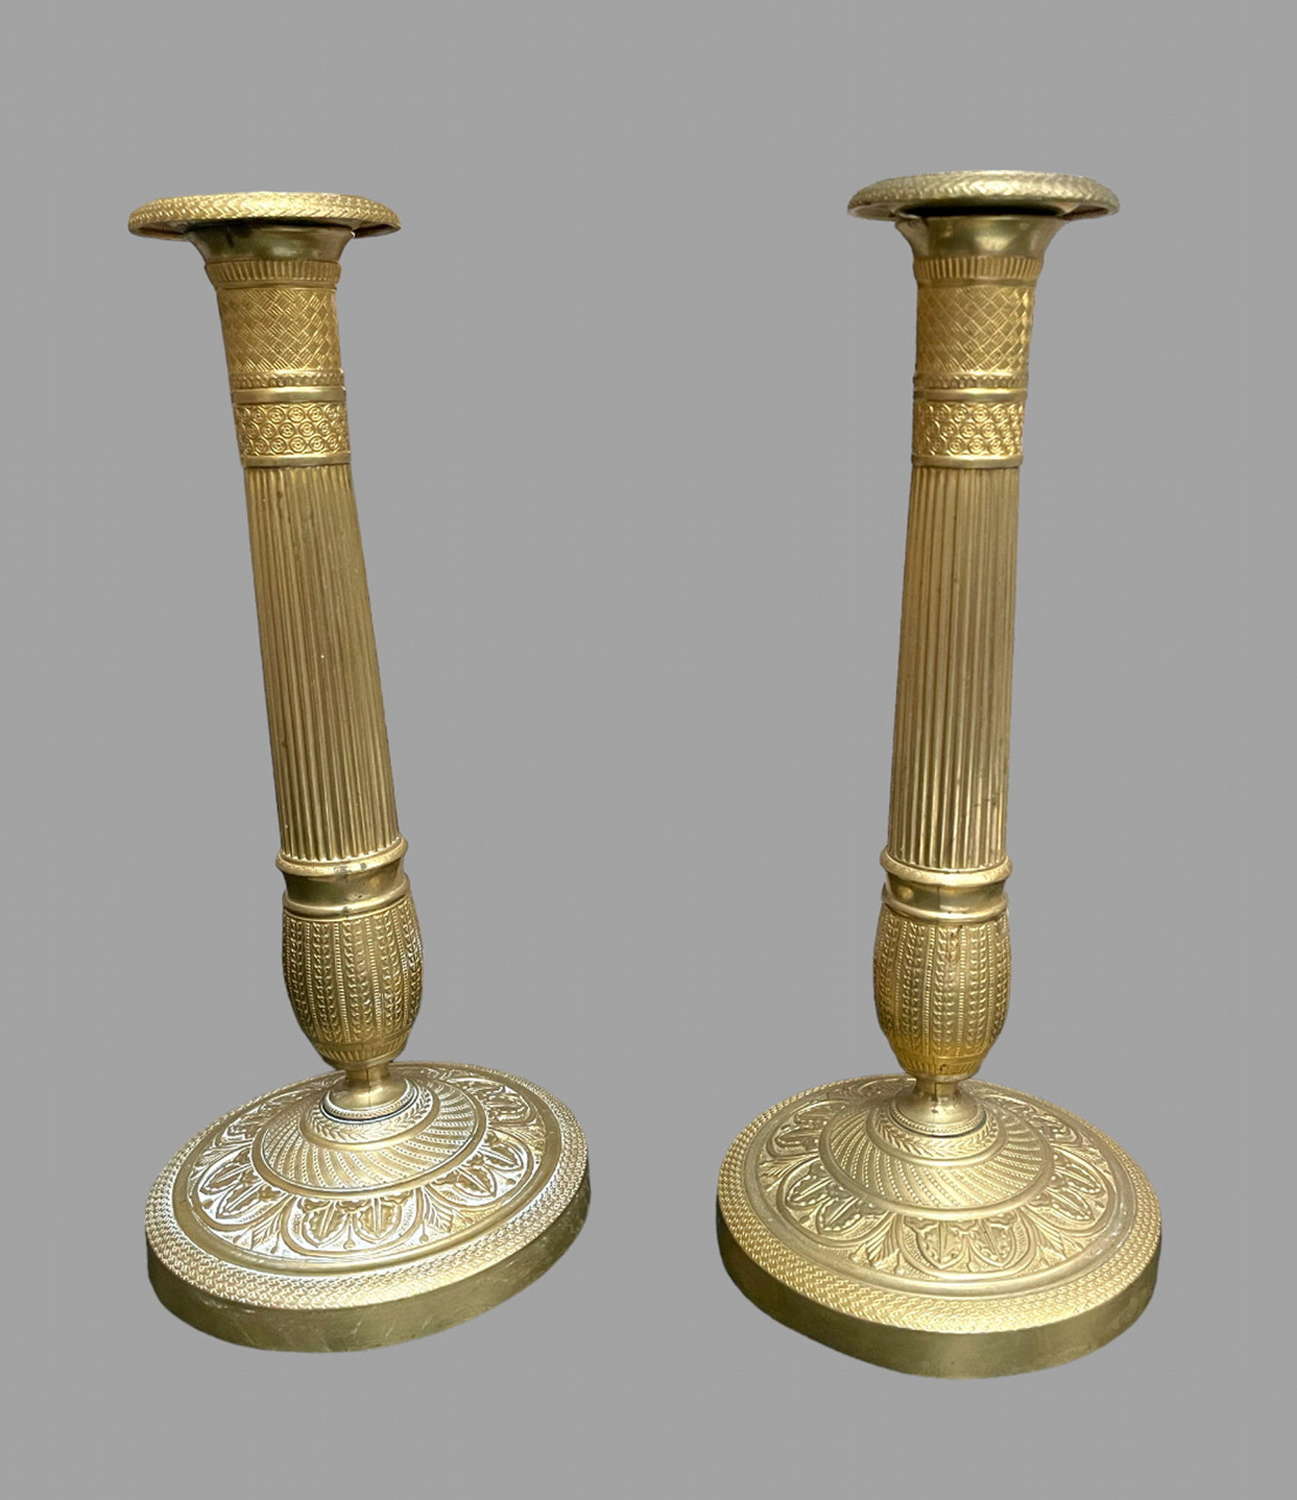 A Pair of French Gilt Brass Empire Candlesticks